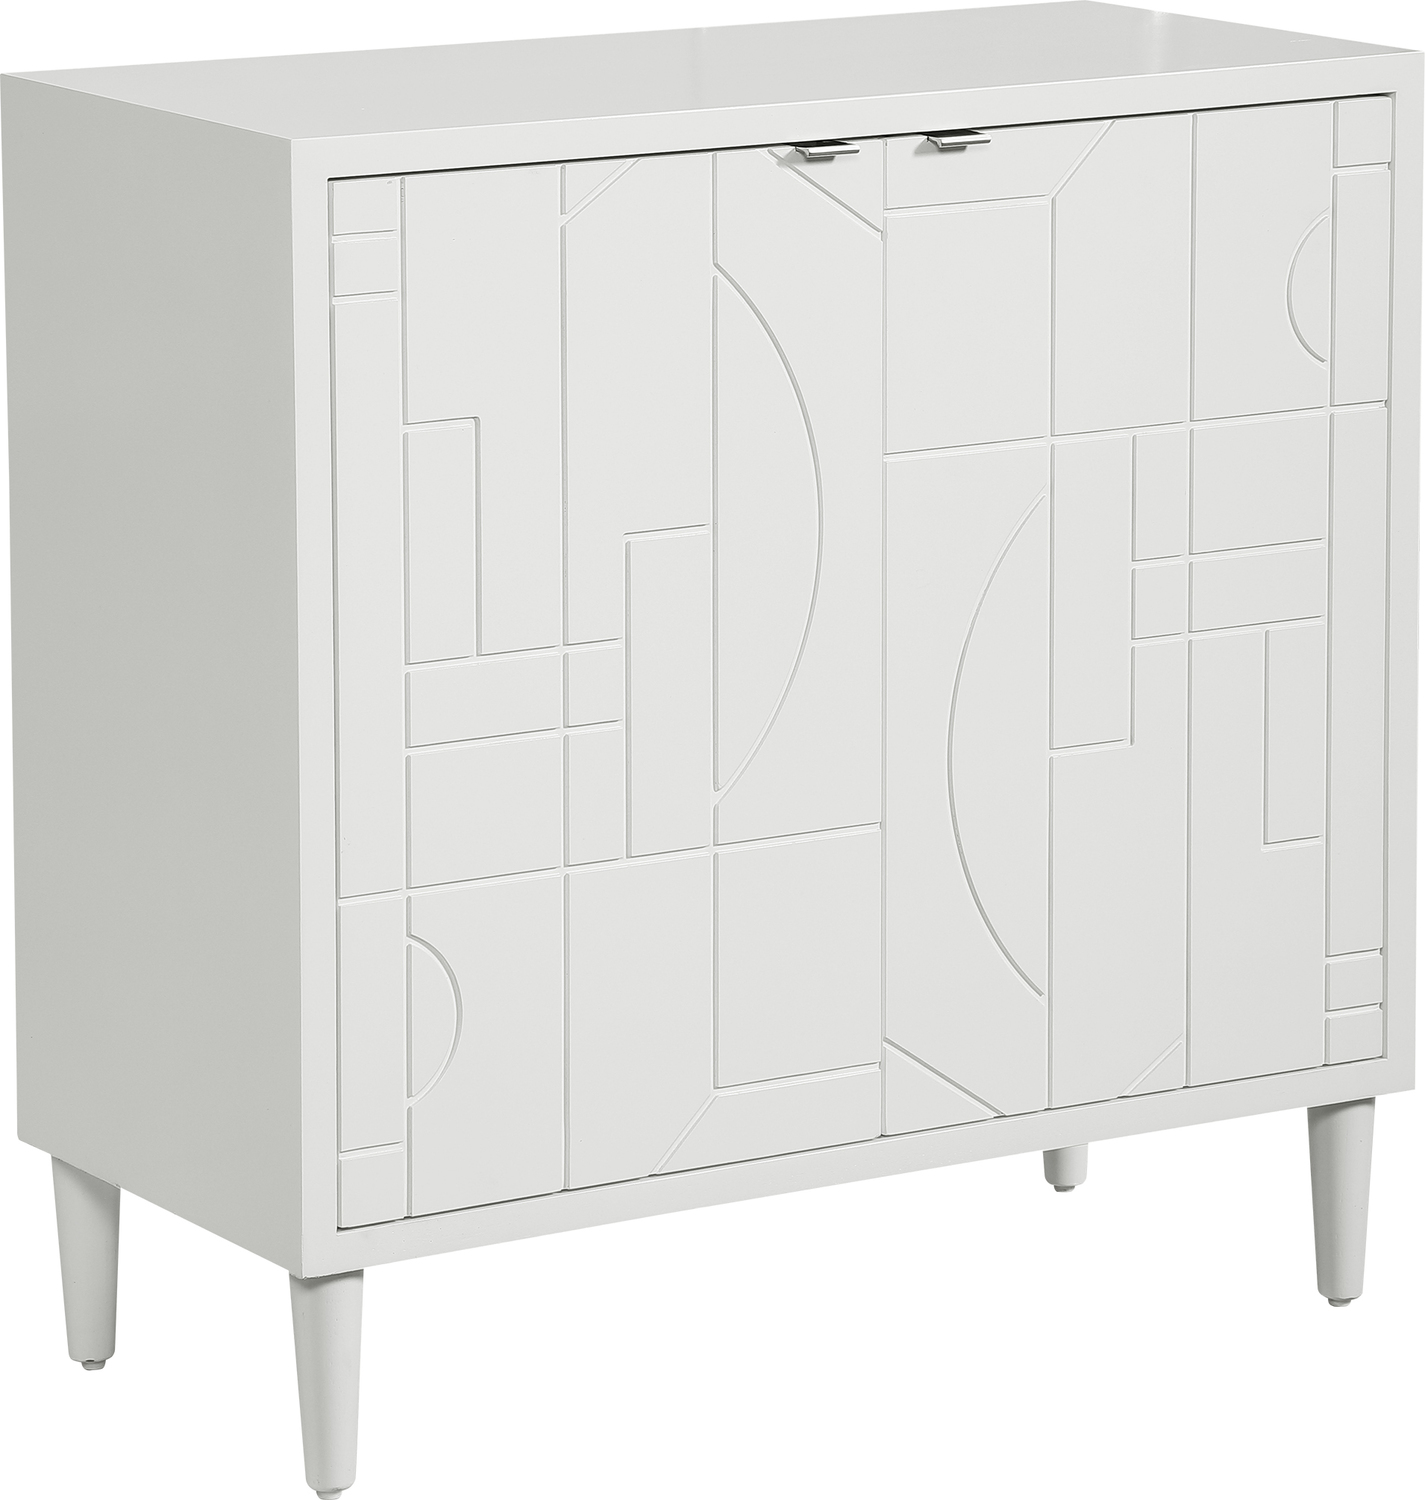  Uttermost Chests & Cabinets Chests and Cabinets Inspired By Classic Scandinavian And Nordic Designs, This Two Door Cabinet Is Constructed From Solid Wood And Layered In Maple Veneer With A Modern Gloss White Finish, Accented By Unique Geometric Carved Details And Stainless Steel Tab Door Pulls Finished In Polished Nickel. Has One Adjustable Interior Shelf And Wire Management.